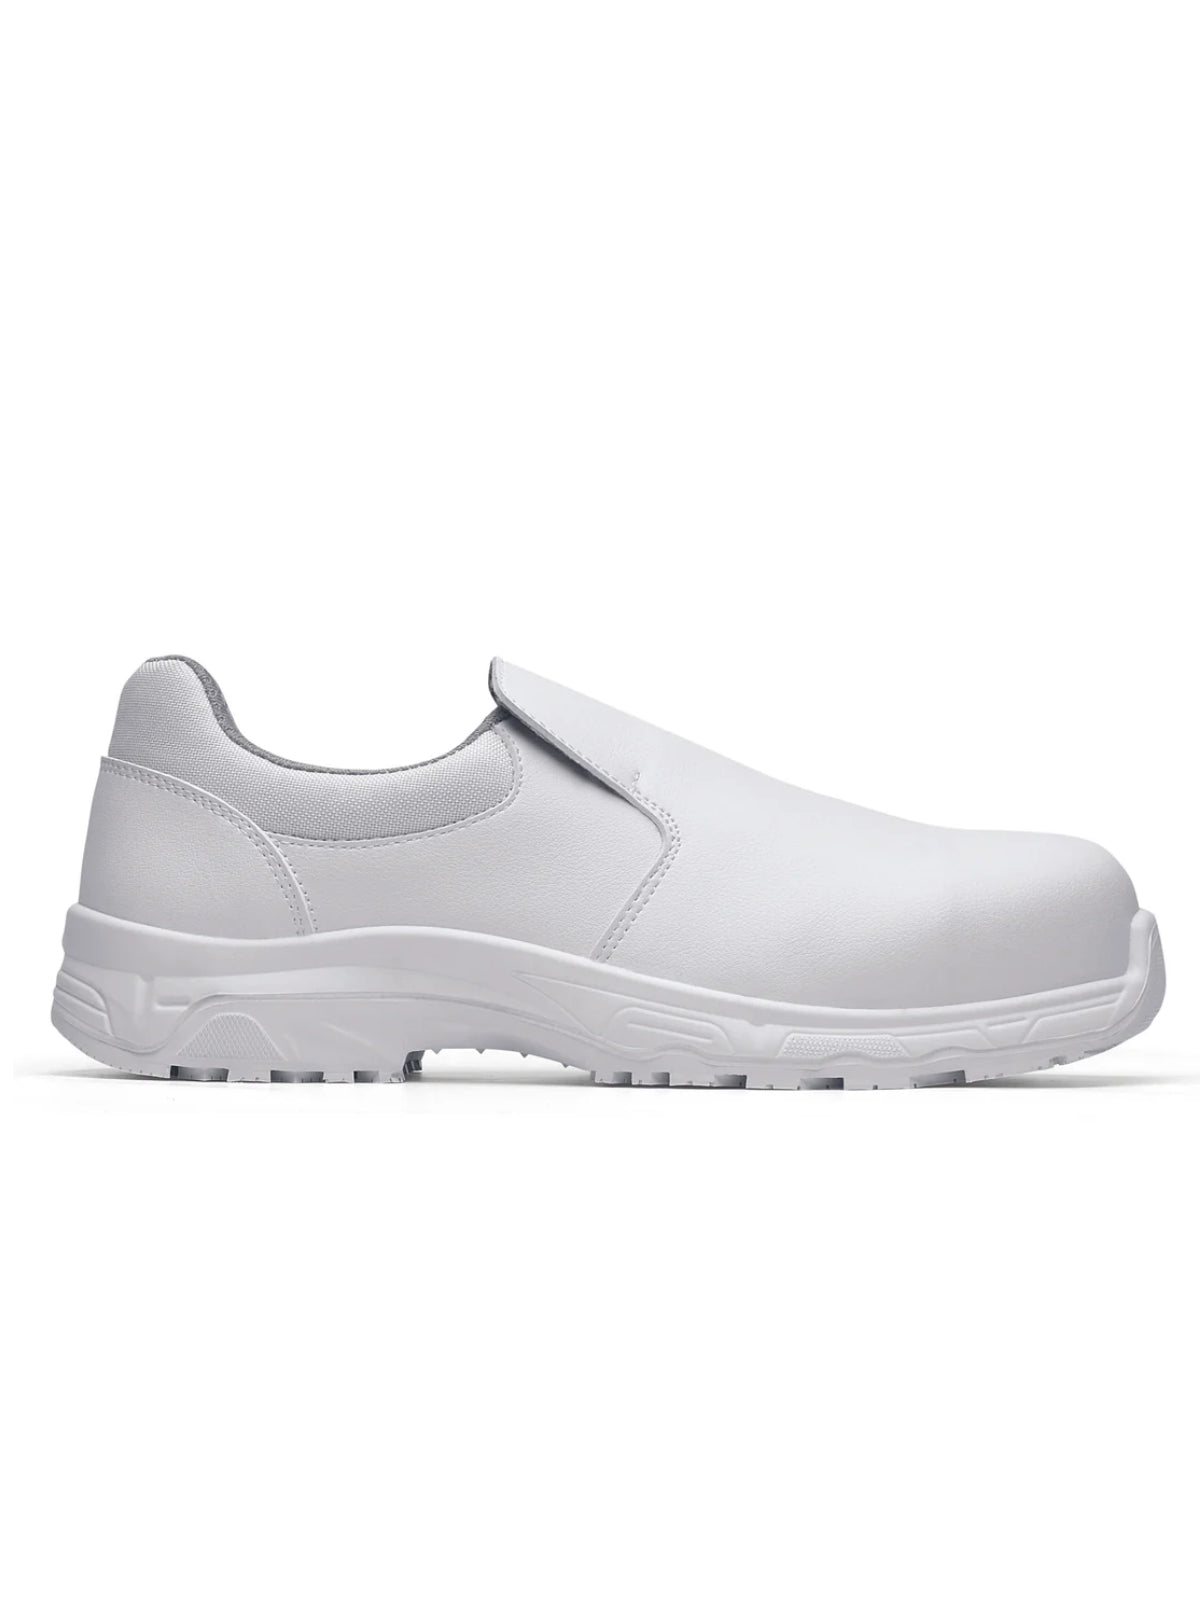 Unisex Safety Shoe Catania White (S3) by Shoes For Crews -  ChefsCotton